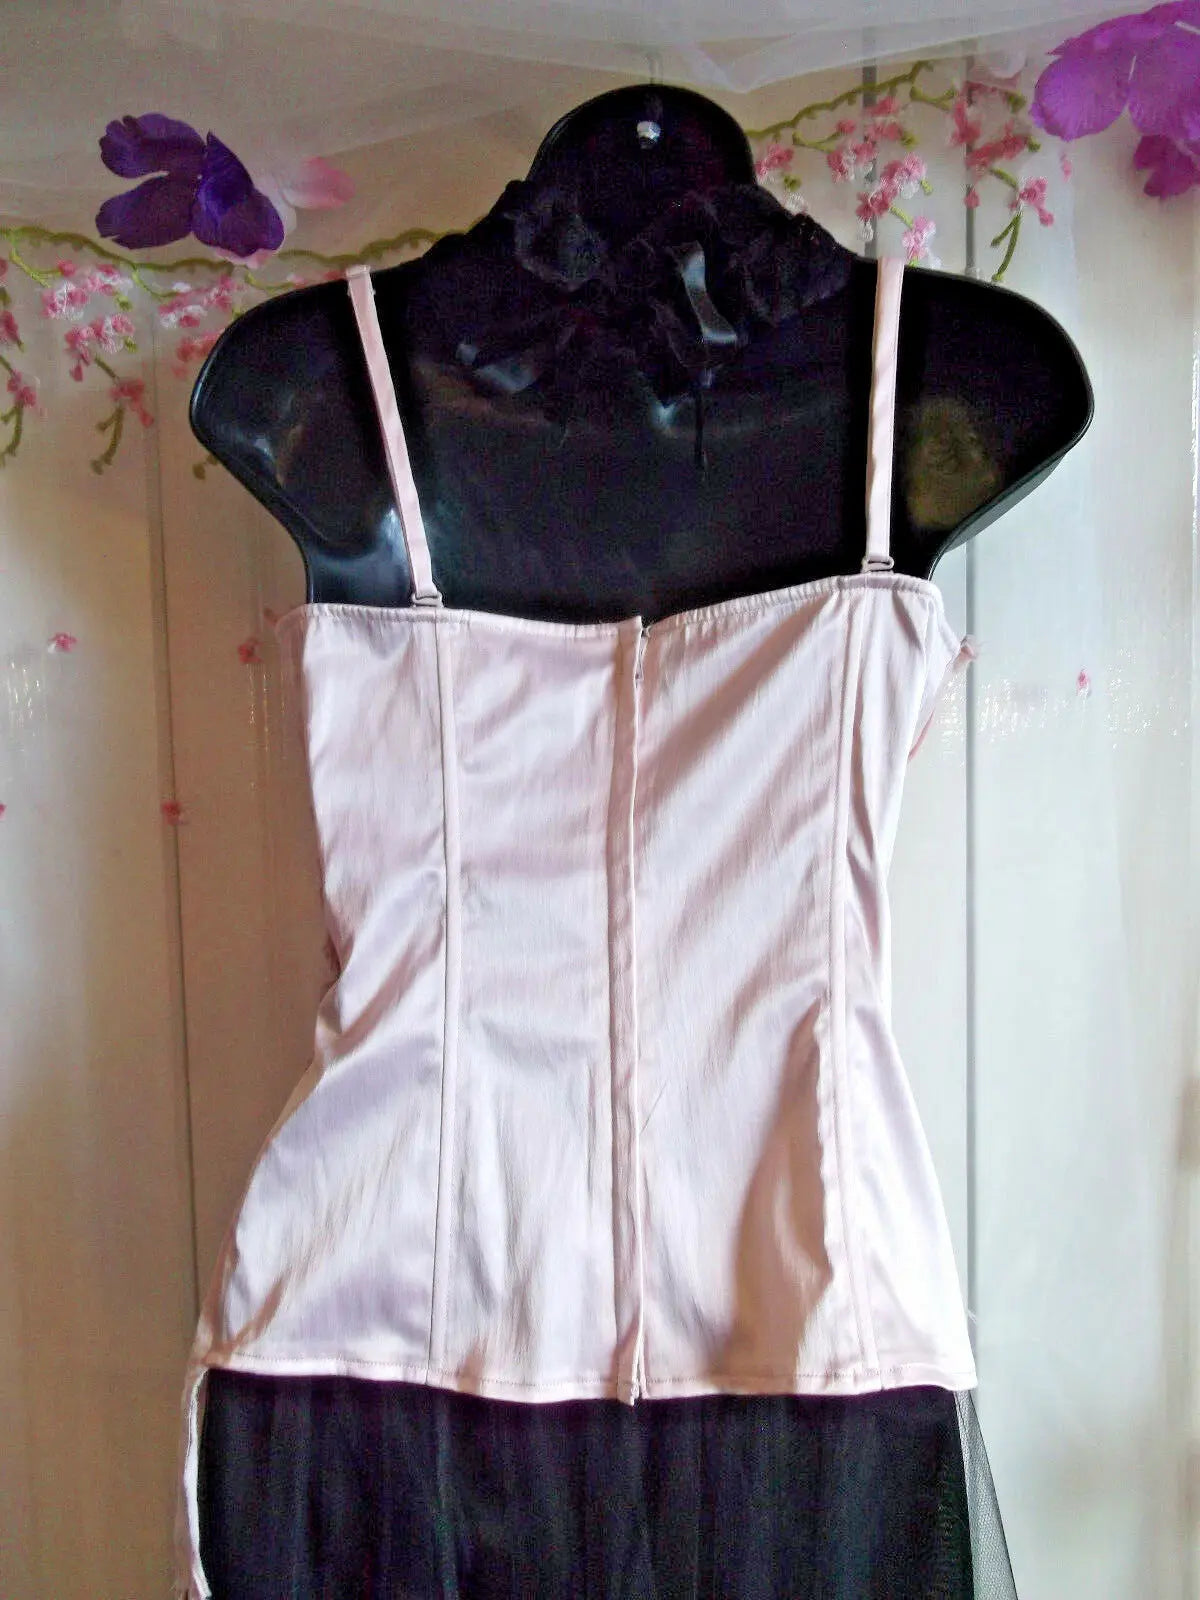 Ladies Size 10 Dusky Pink Corset Style Top From TOPSHOP,diamante/ruffle detail Topshop